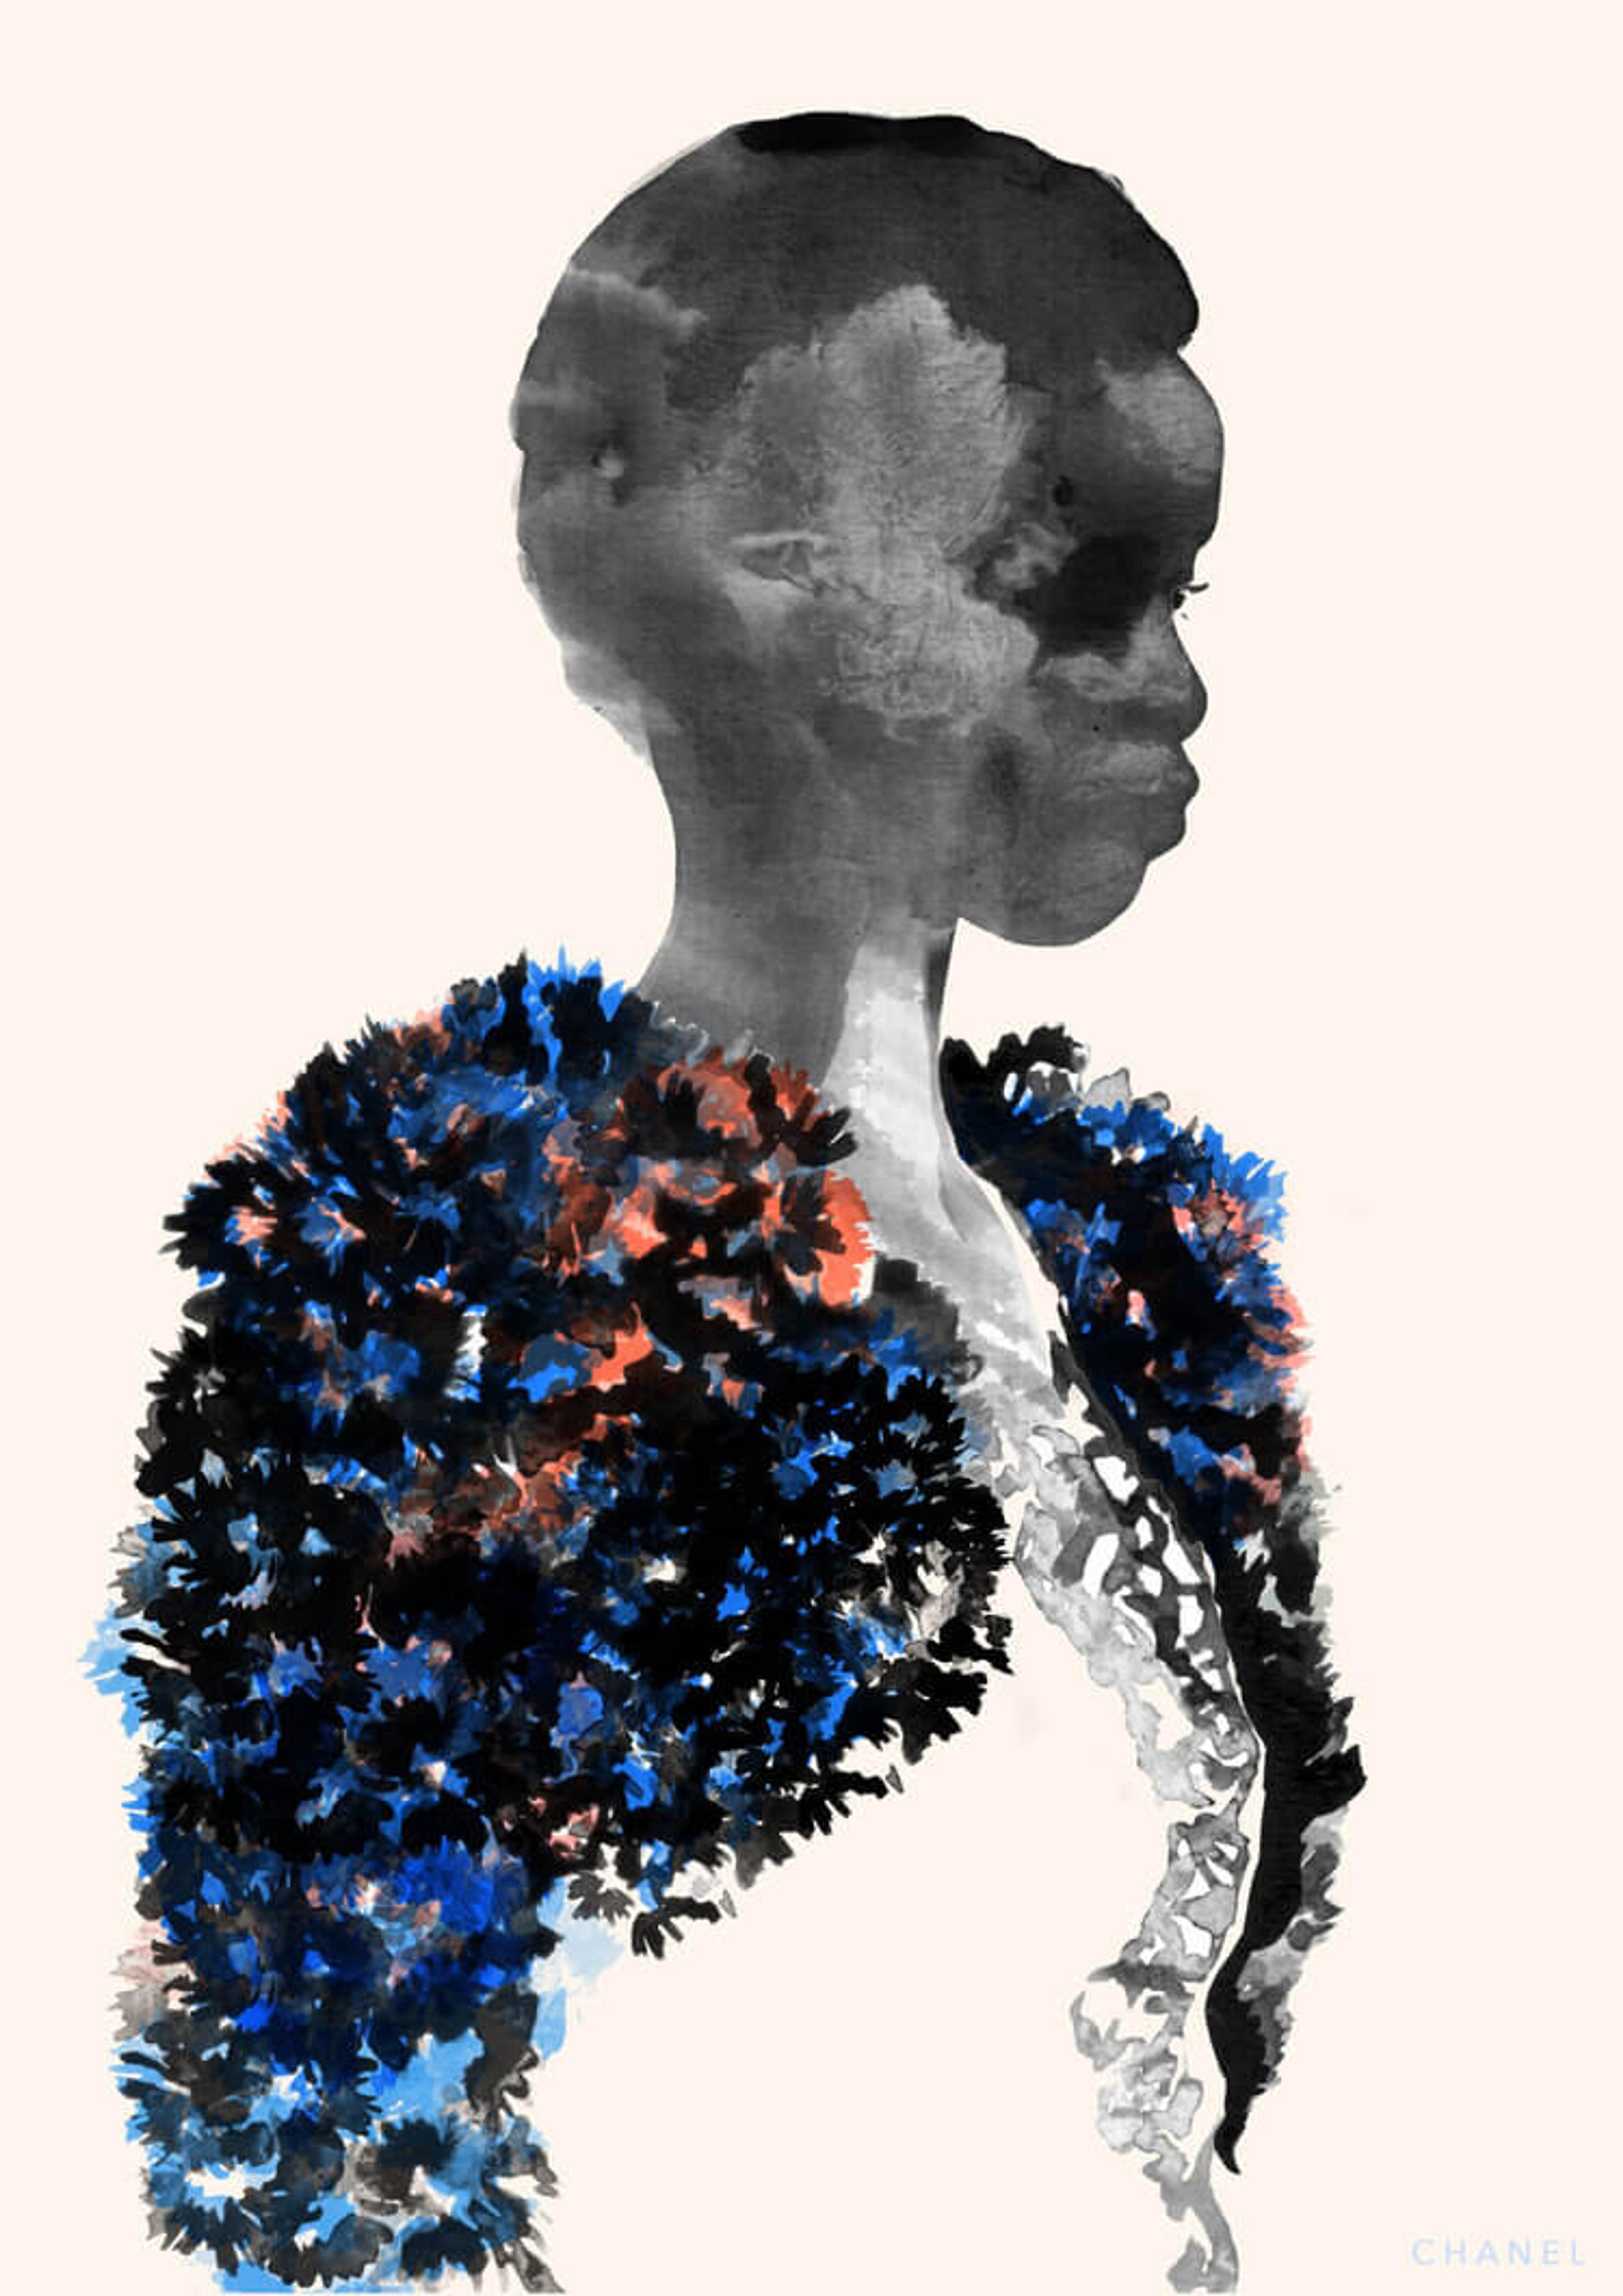 Illustration of a person wearing a fuzzy blue cardigan.